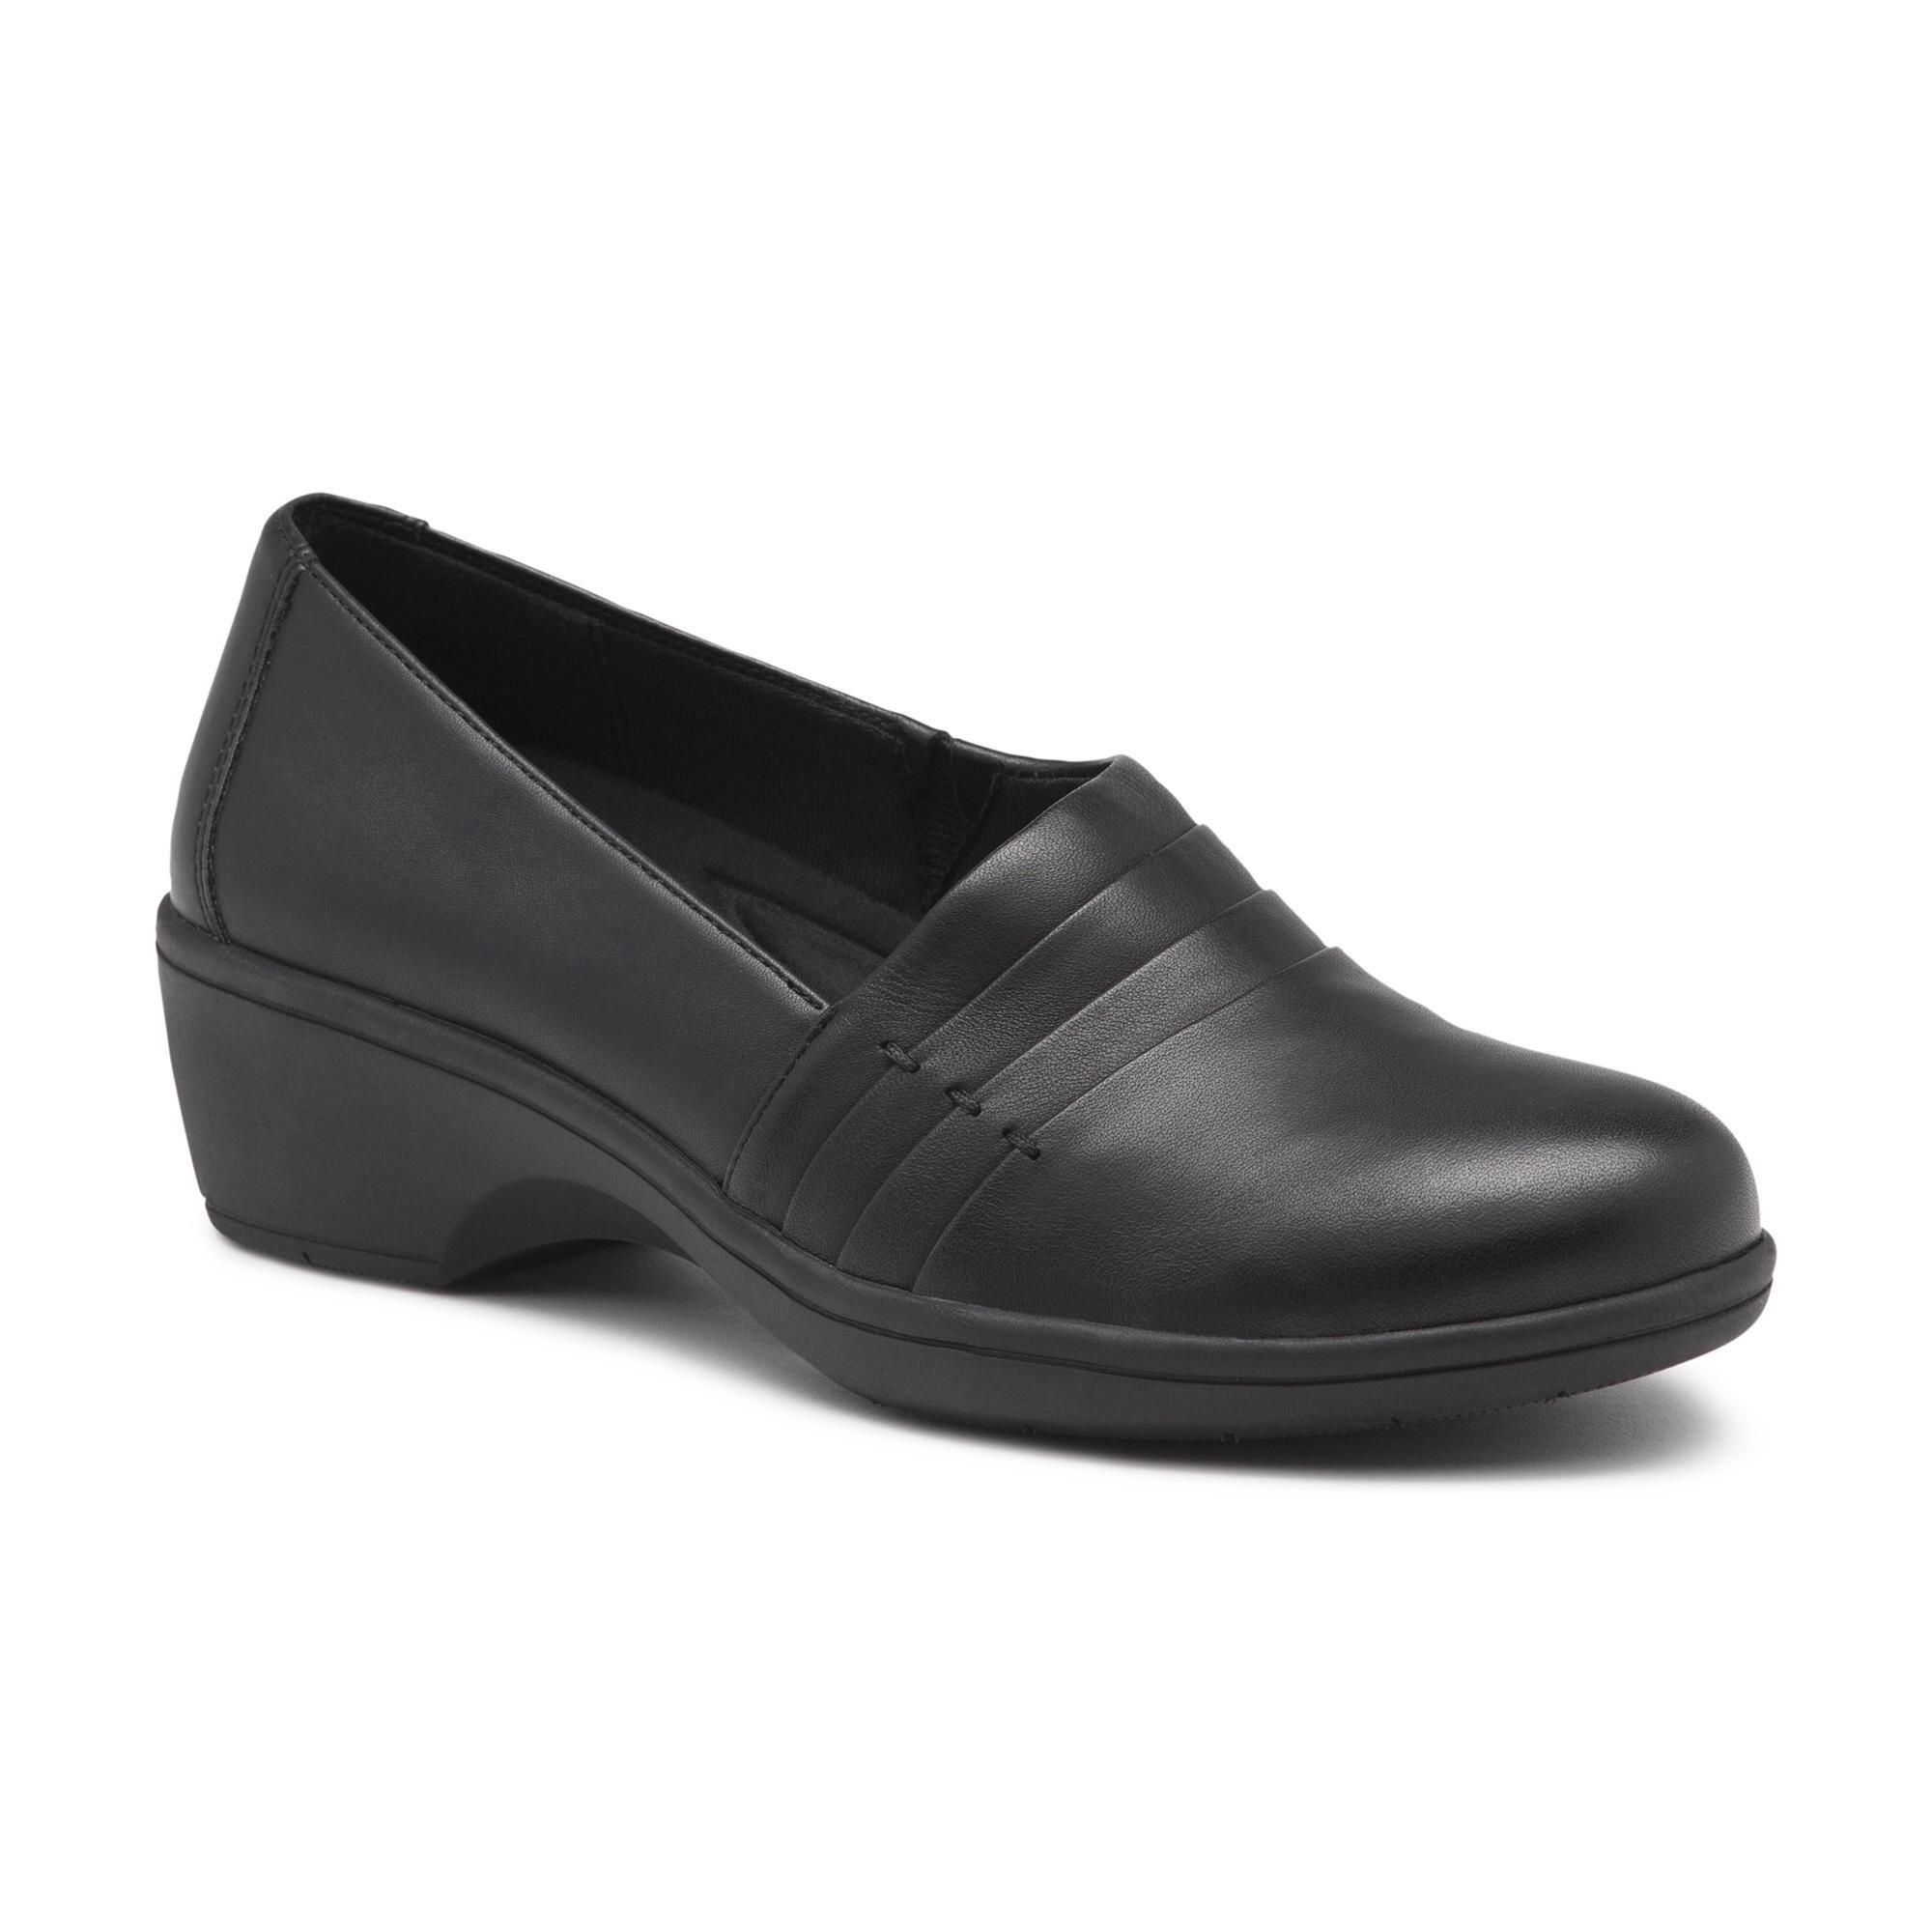 Lyst - G.H. Bass & Co. Eleanor Leather Comfort Dress Shoe in Black